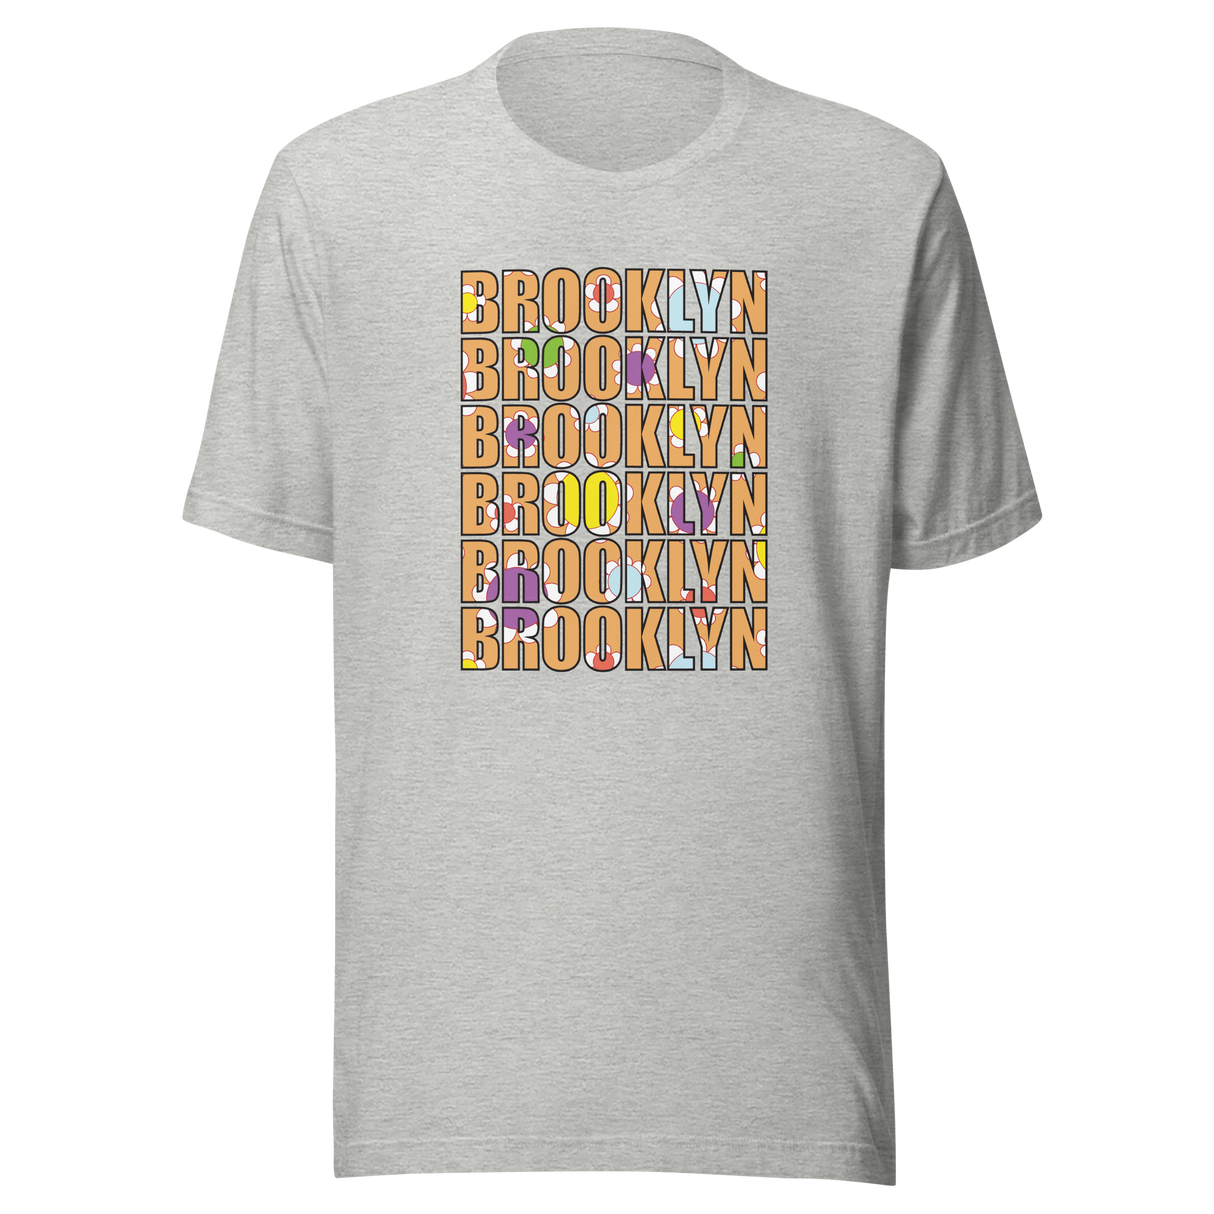 brooklyn-with-stroke-and-floral-mask-brooklyn-tee-new-york-t-shirt-nyc-tee-gift-t-shirt-brooklyn-pride-tee#color_athletic-heather